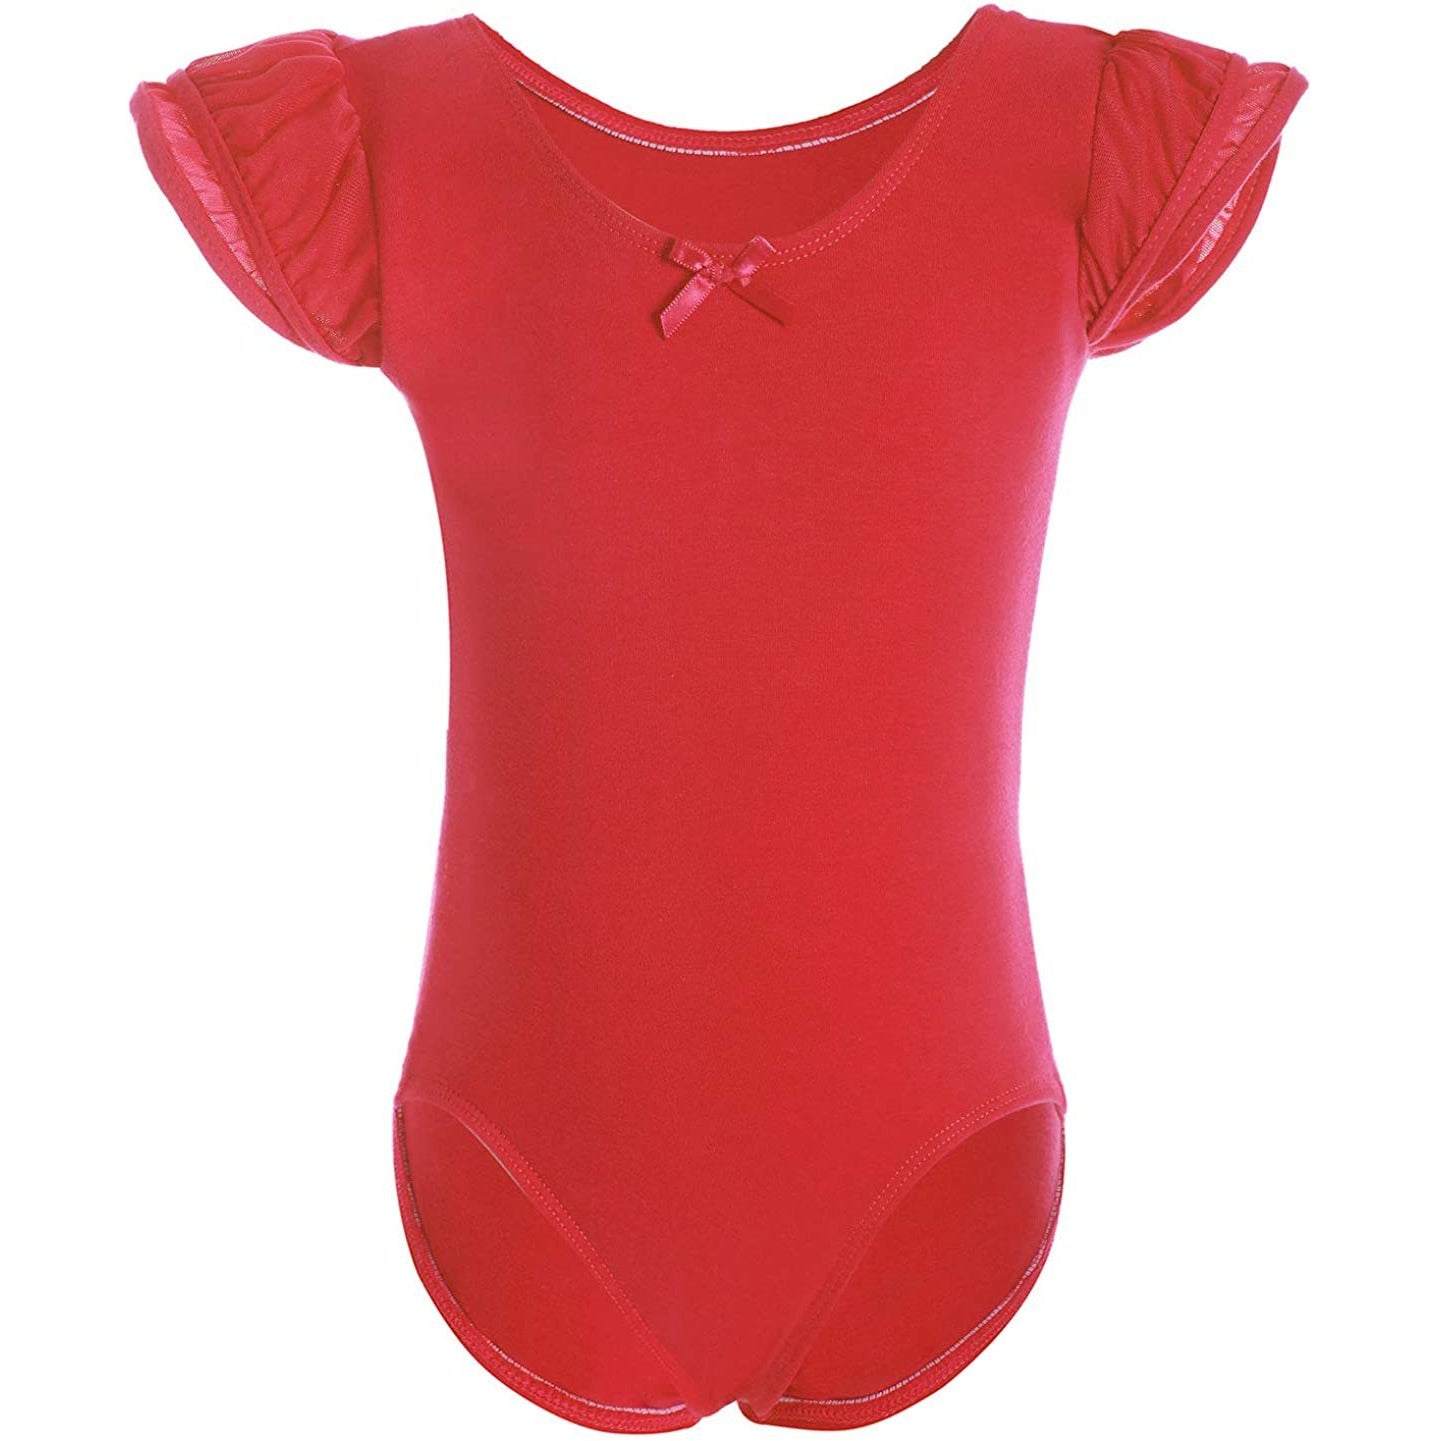 Dancina Girls Ballet Leotard with Flutter Sleeve and Full Front Lining in red